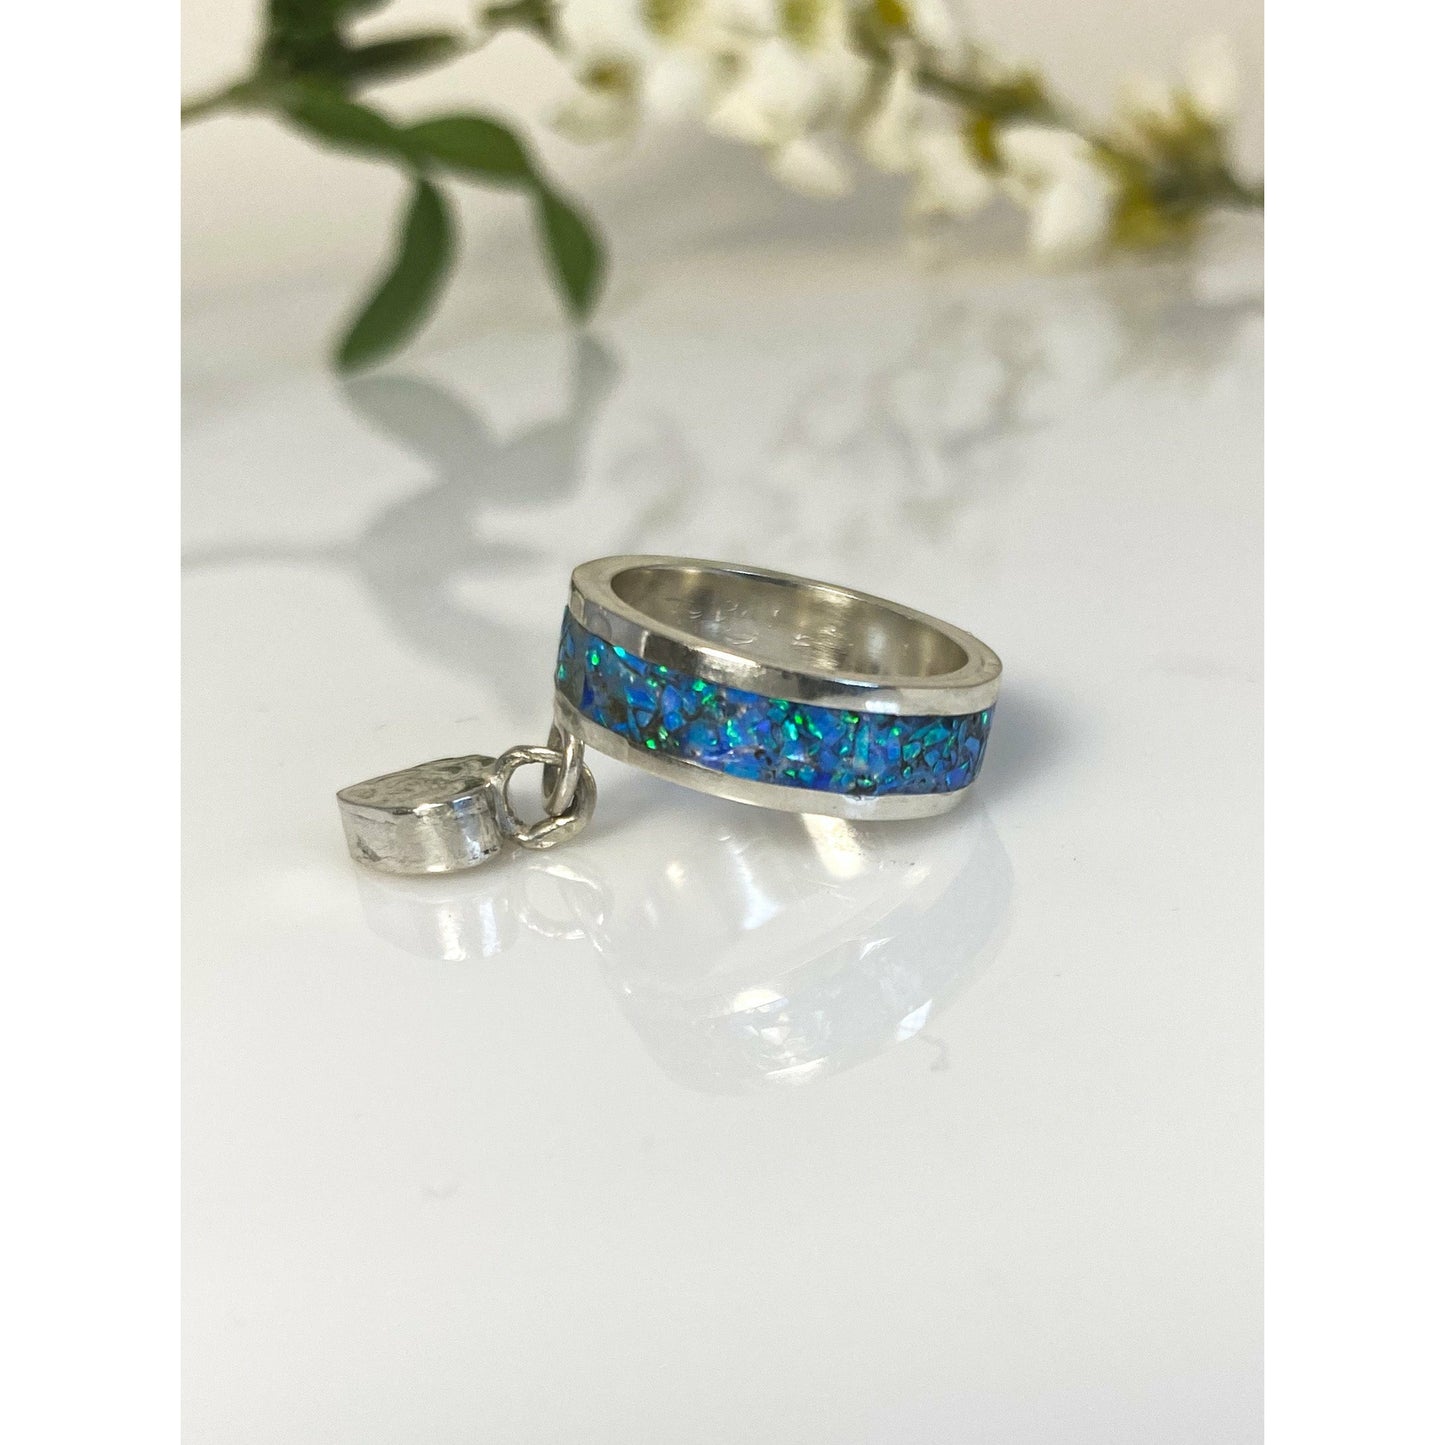 Australian Blue Opal Sterling Silver Inlay Ring with Sterling Silver Heart Charm